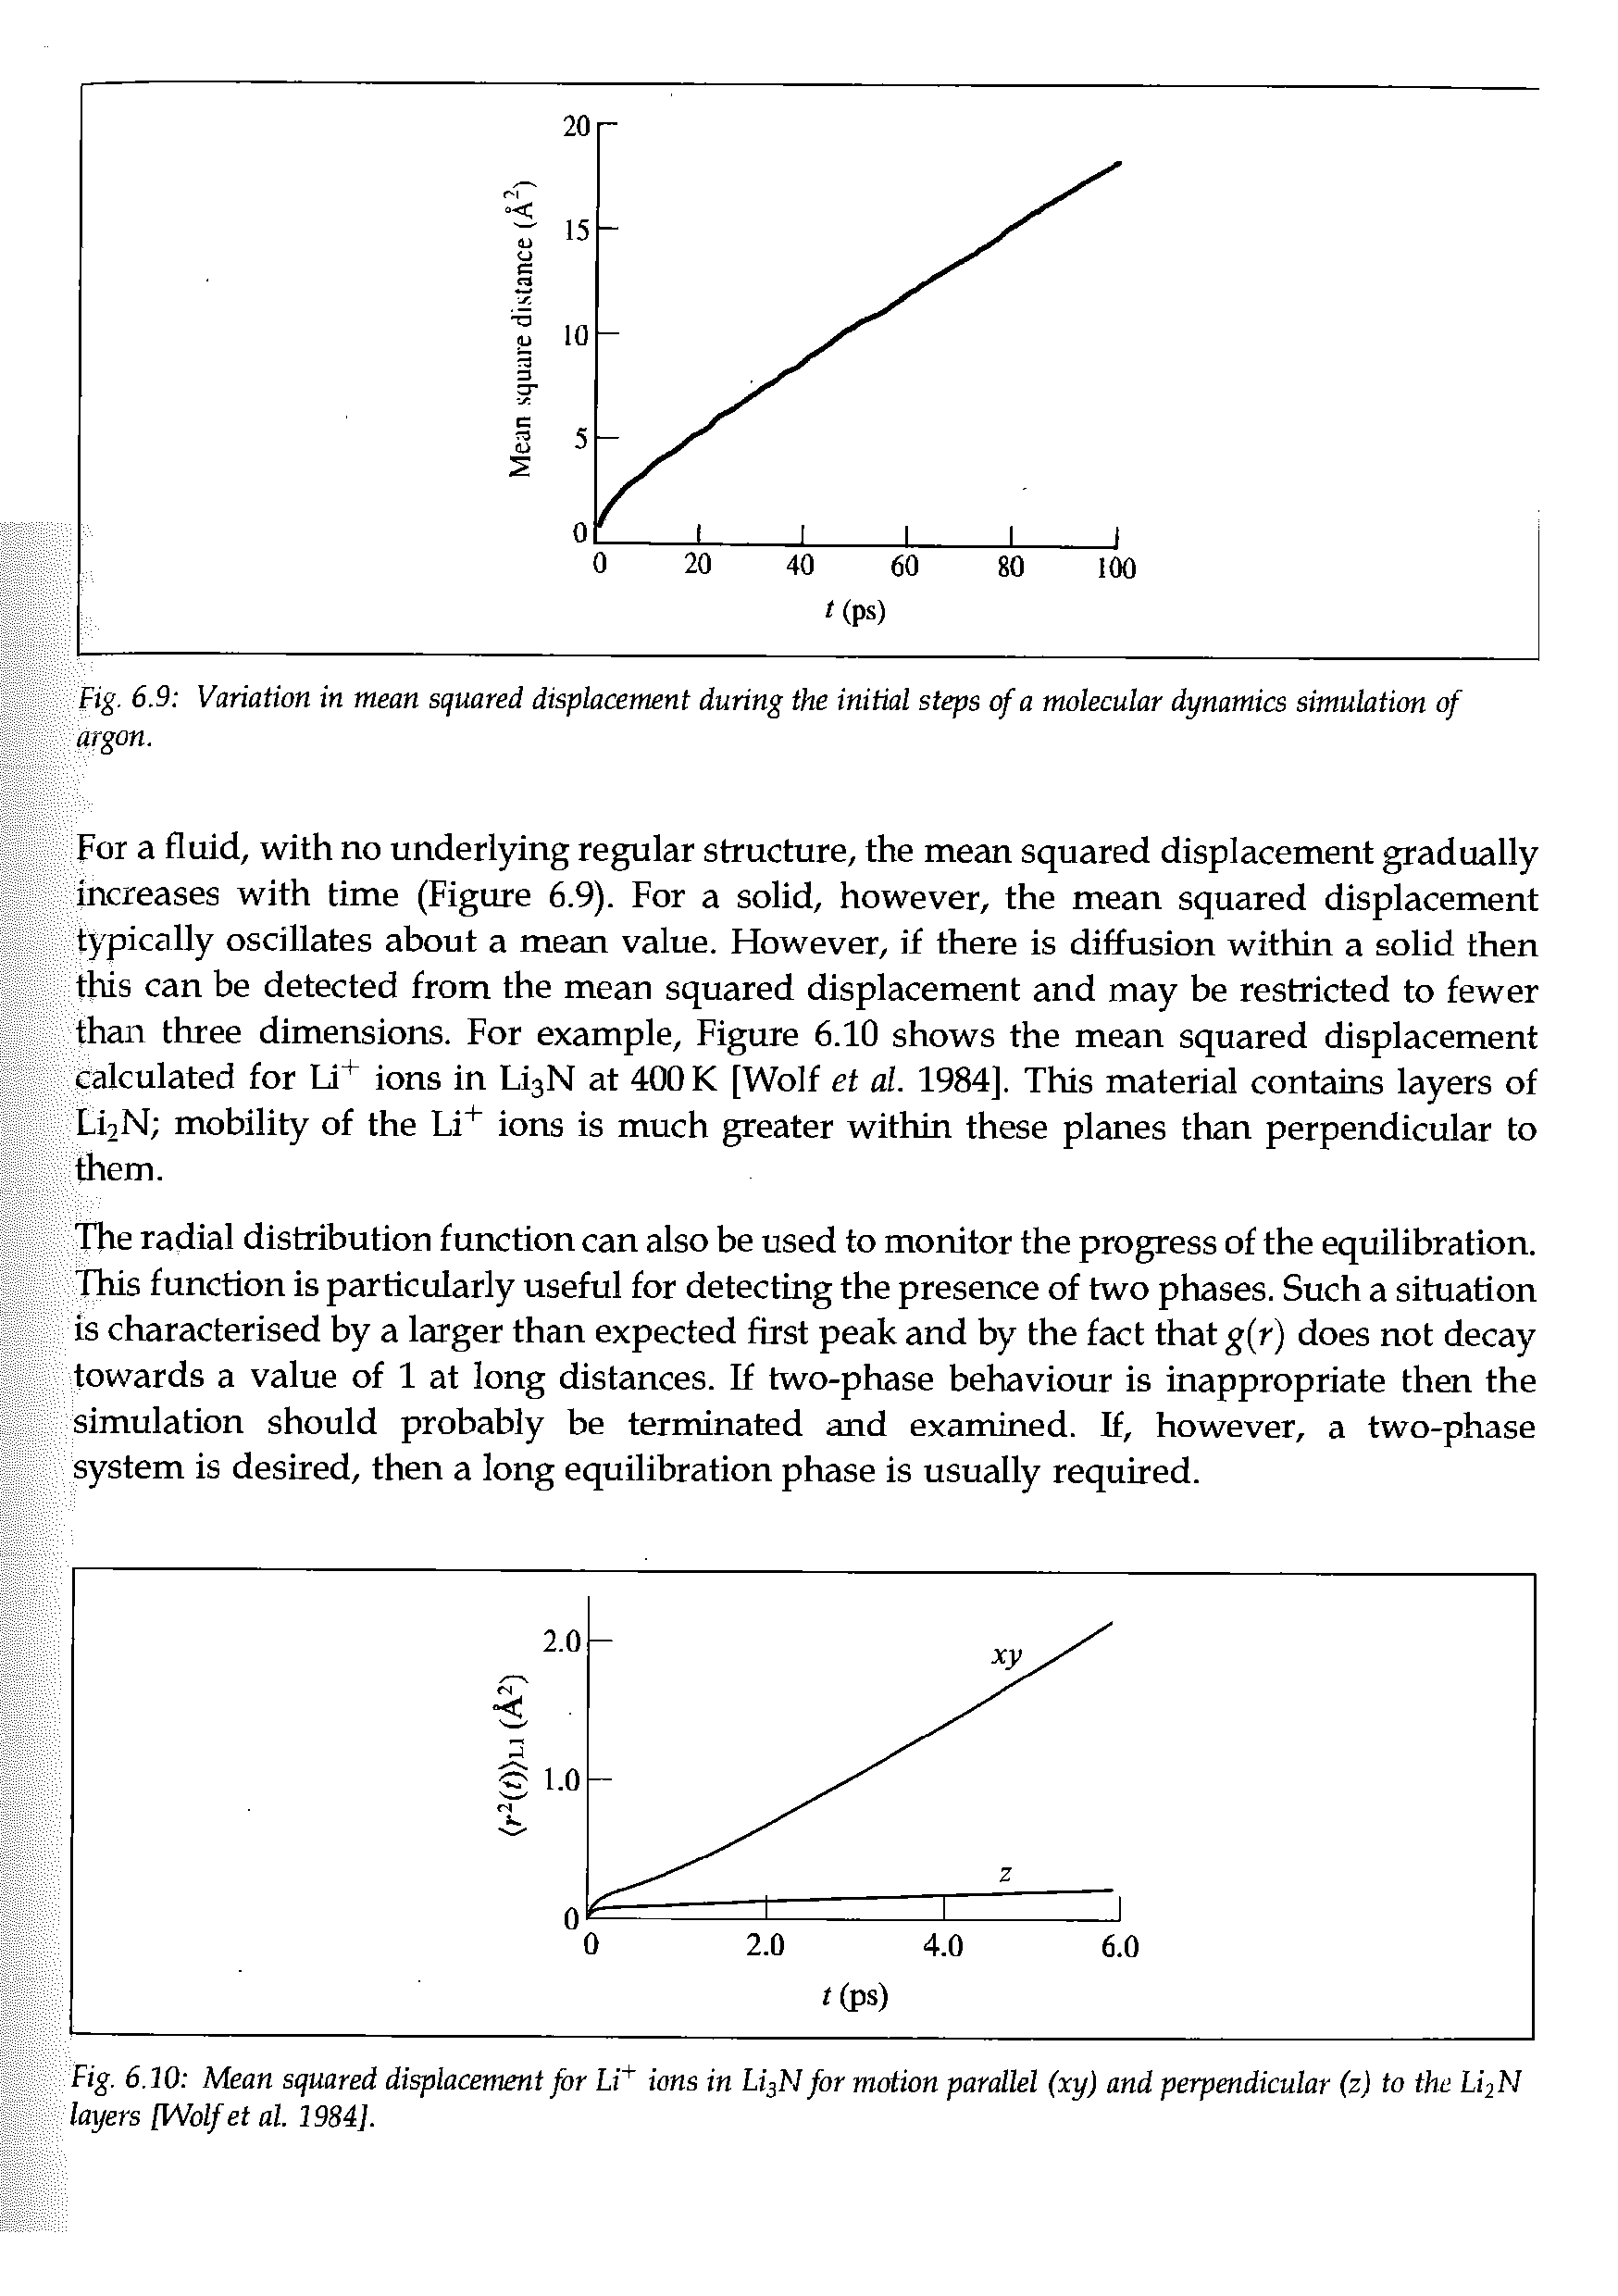 Fig. 6.10 Mean squared displacement for Li ions in Li N for motion parallel (xy) and perpendicular (z) to the LijN layers [Wolfet al. 1984],...